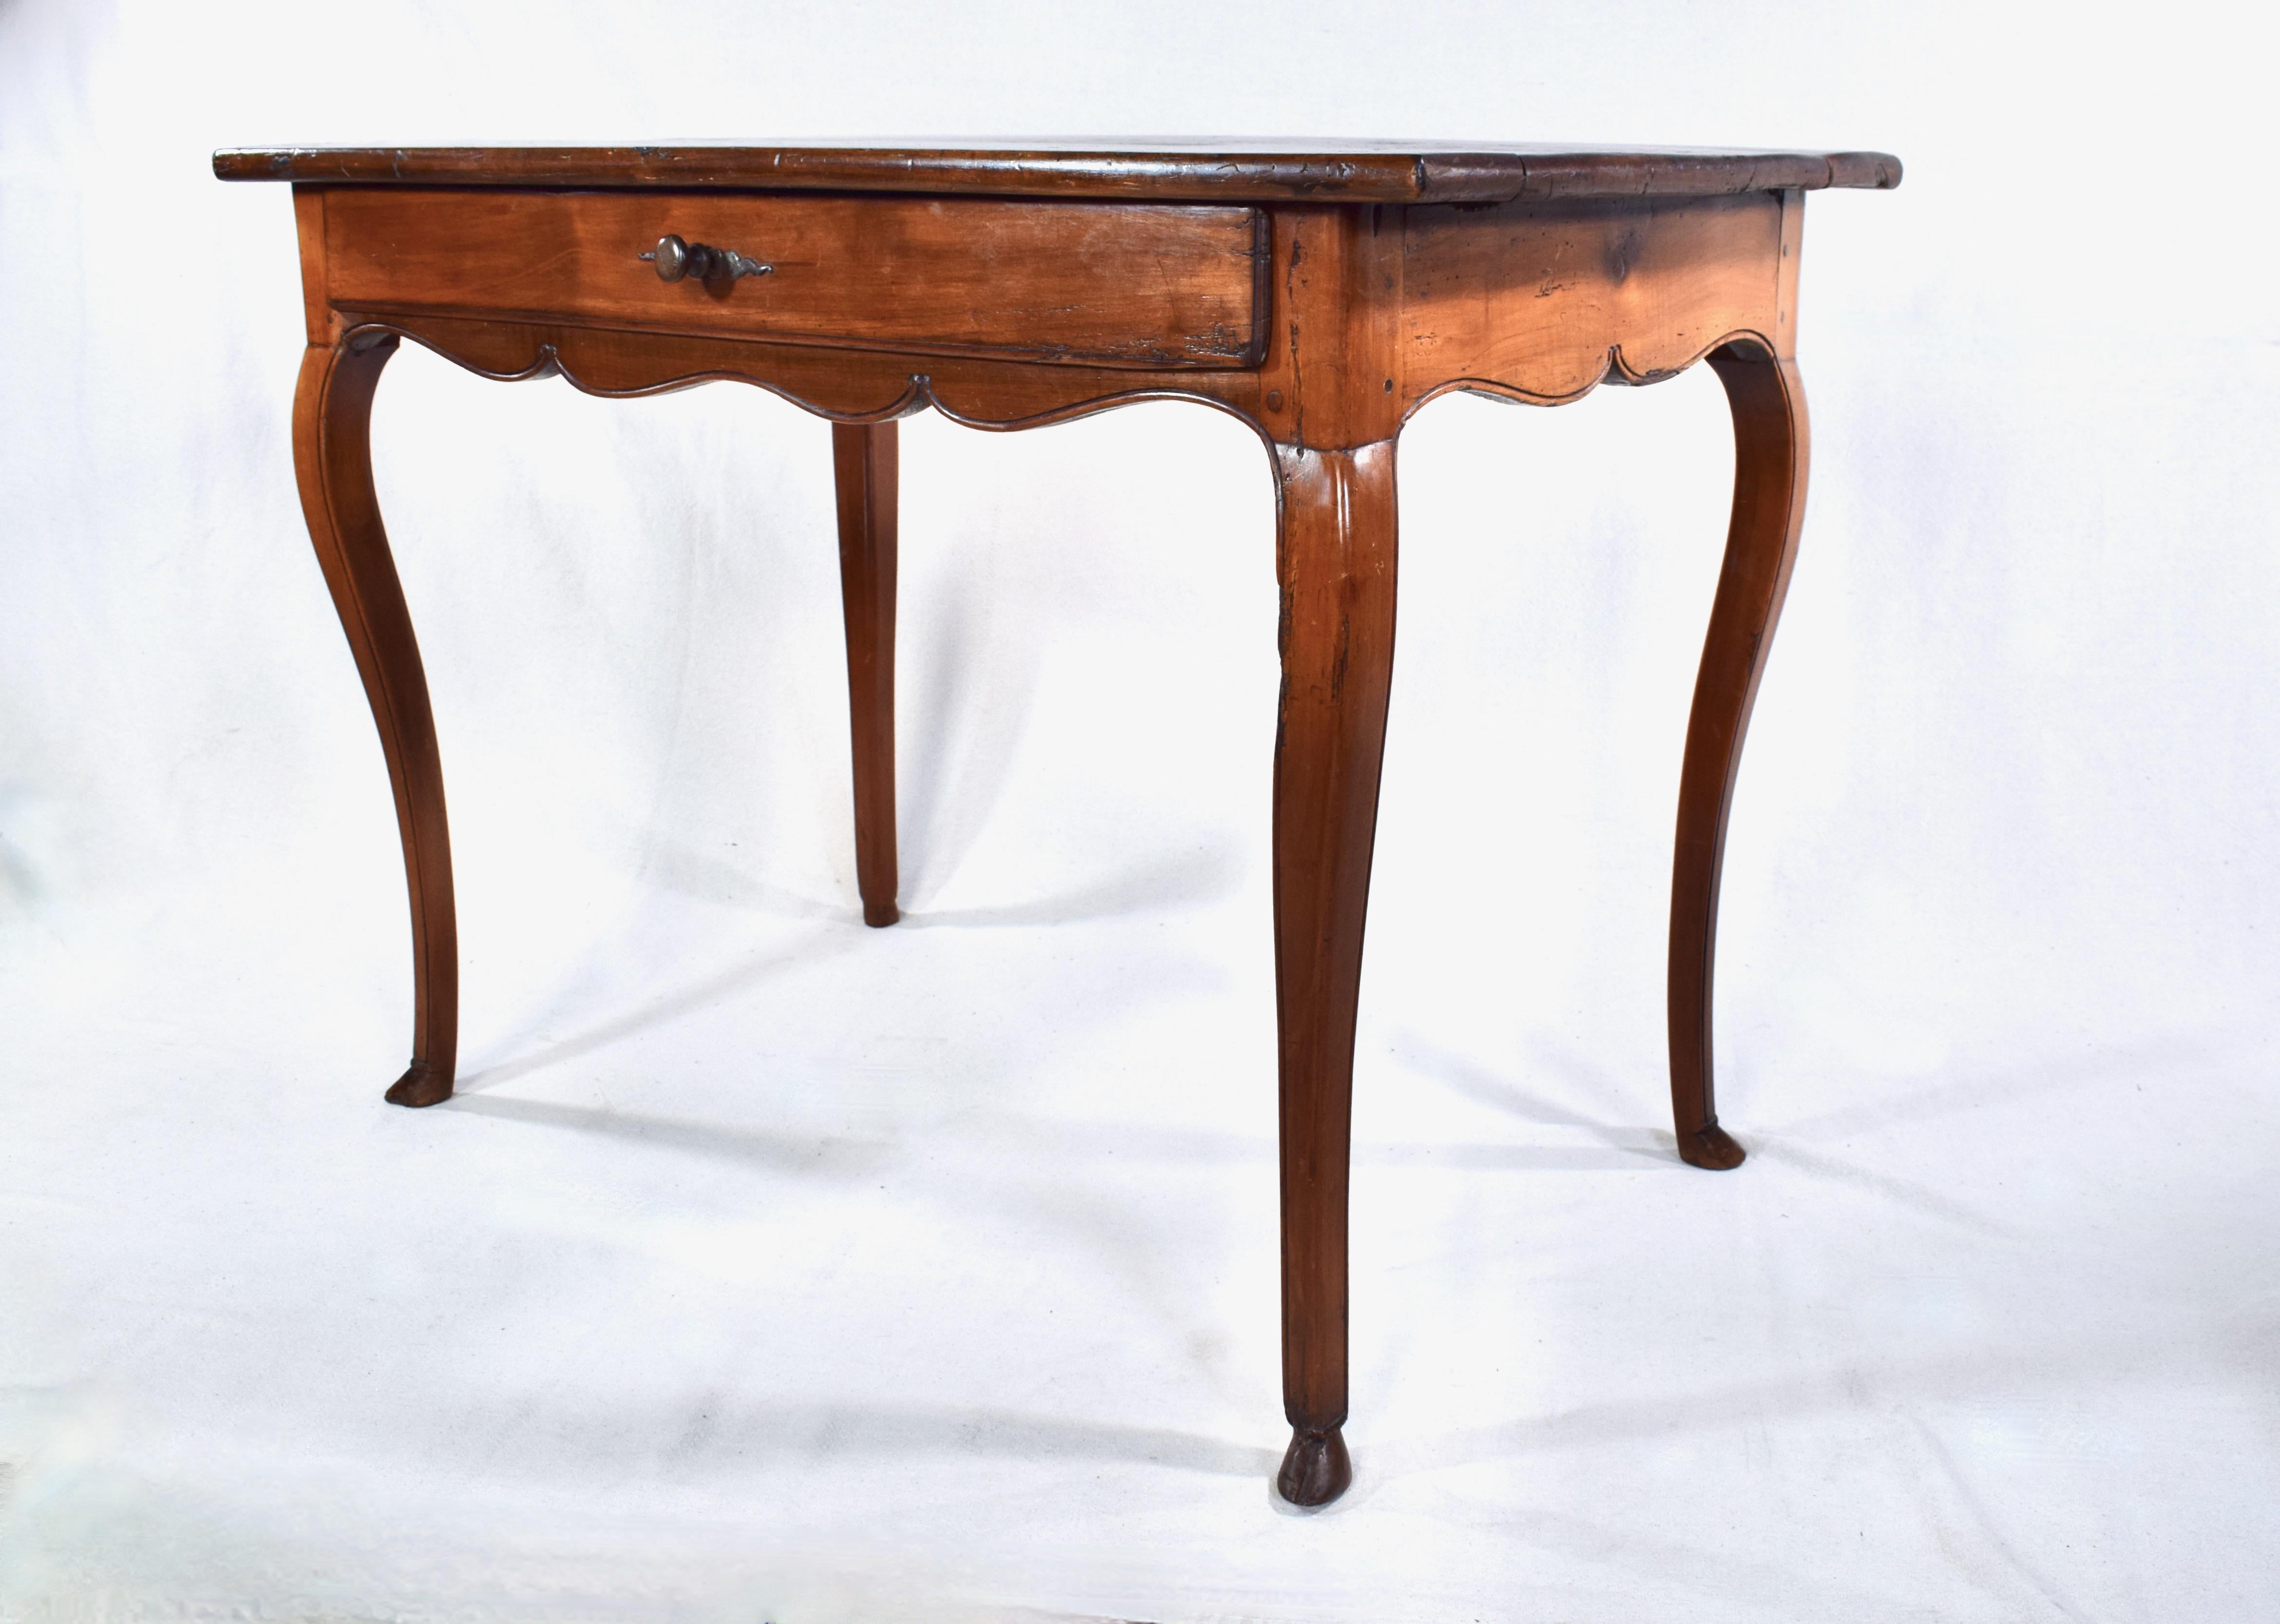 Bronze French Mid-18th Century Louis XV Period Petit Desk or Side Table For Sale